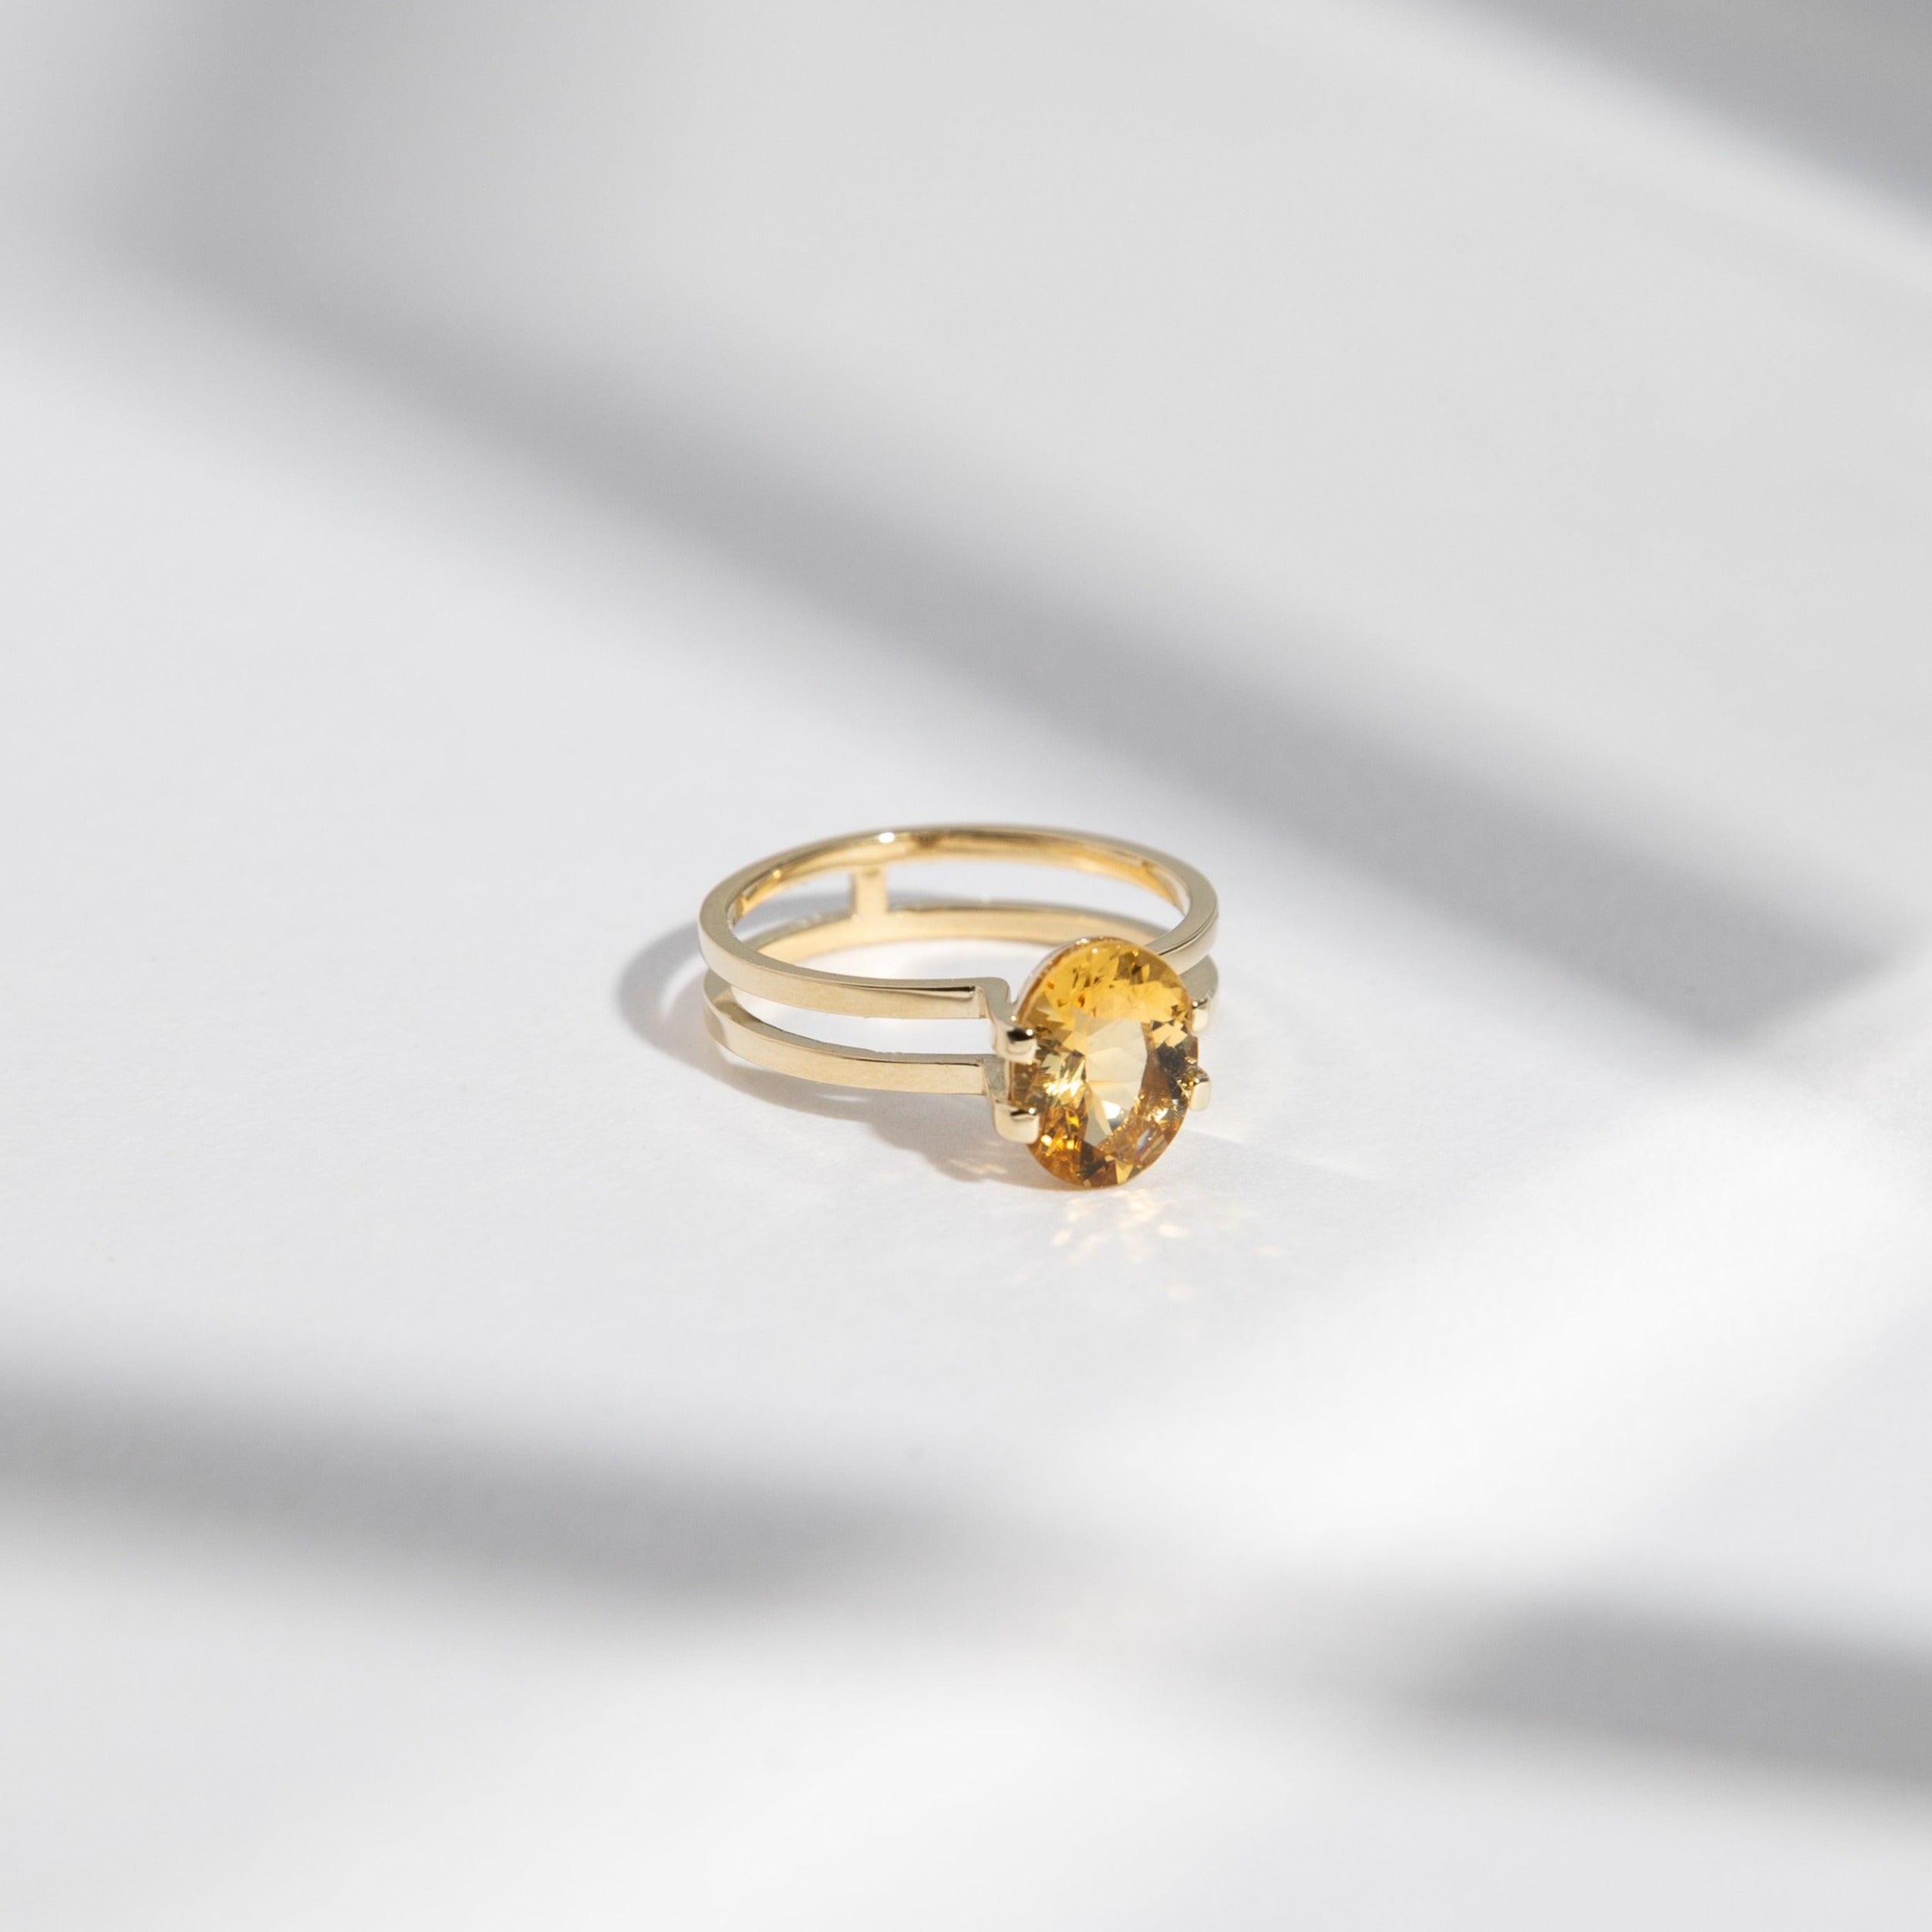 Mes Non-Traditional Ring in 14k Gold set with a 1.5ct oval cut heliodor By SHW Fine Jewelry NYC